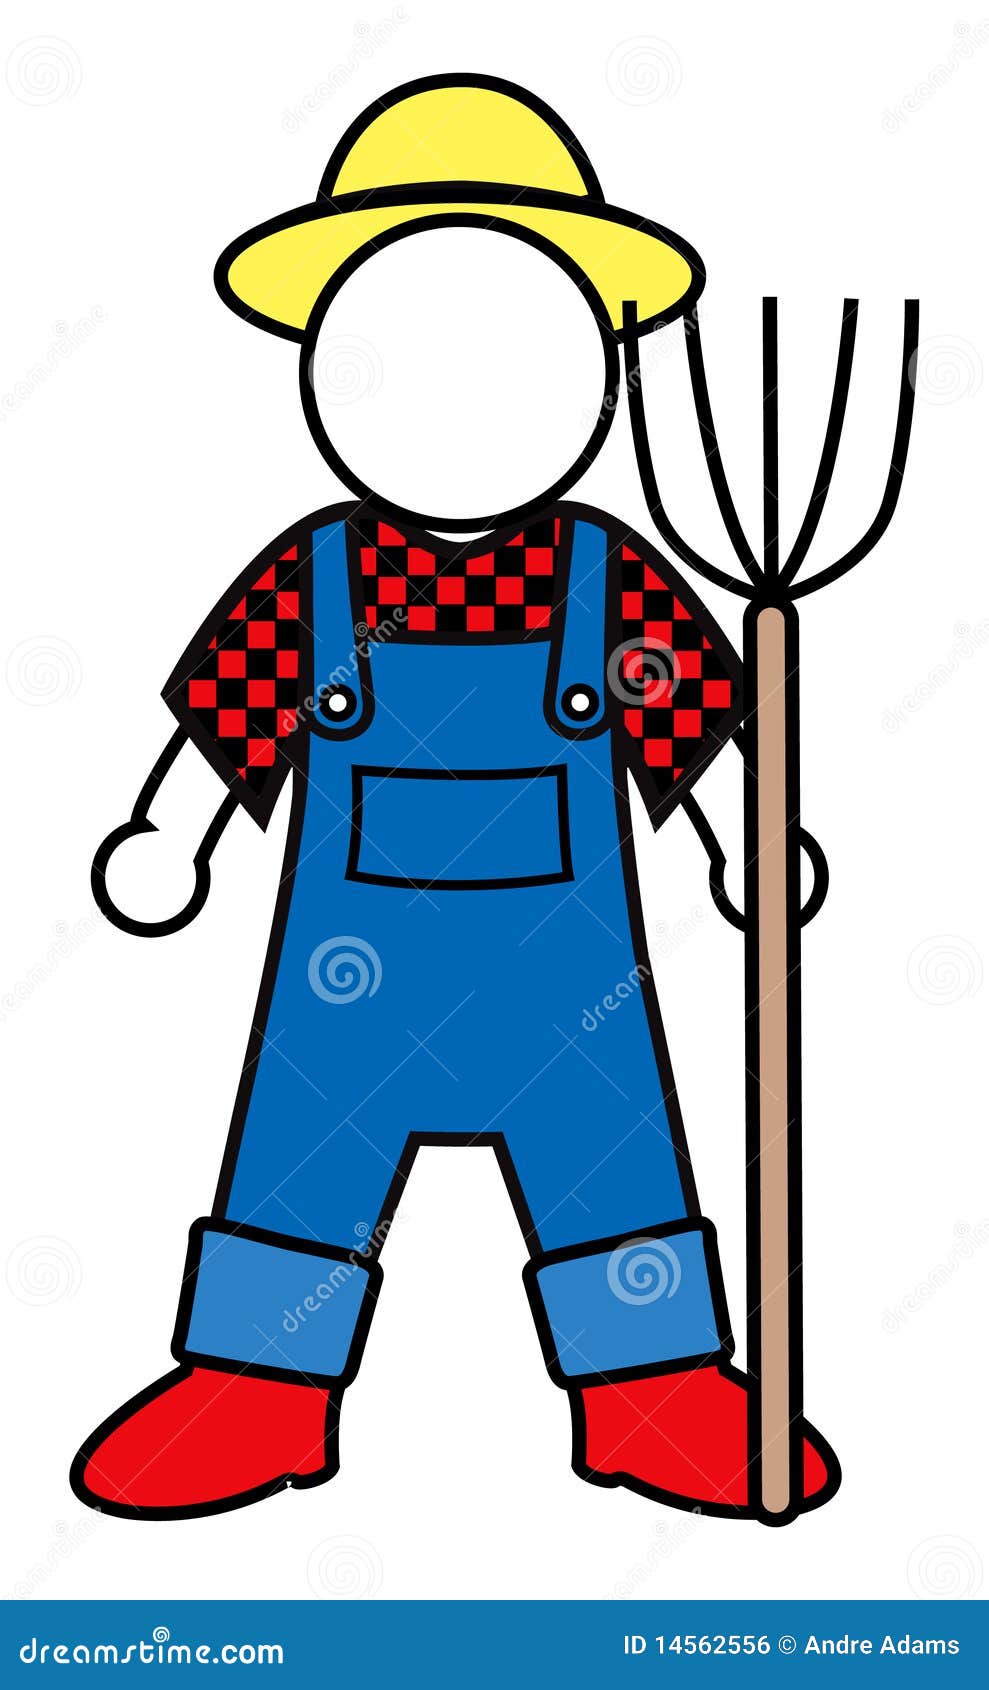 392 Farmer Outfit Stock Illustrations, Vectors & Clipart - Dreamstime